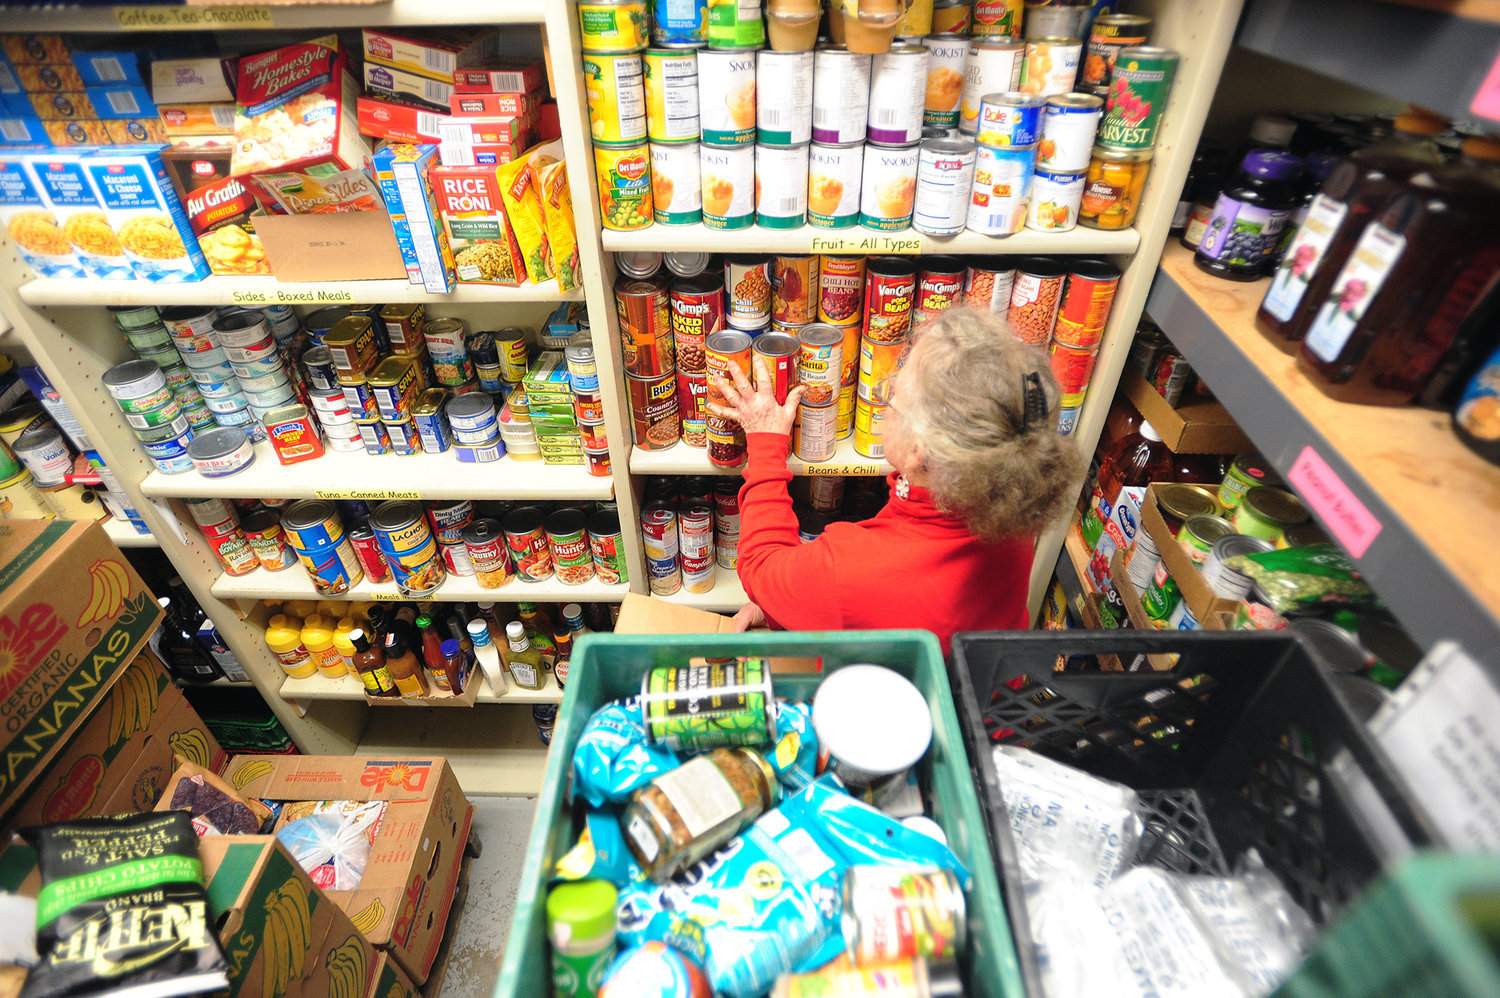 A volunteer sorts through donated food items in this file photo. Walk and Knock, a one-day food drive scheduled for Dec. 3, typically collects between 250,000 and 300,000 pounds of food annually, which is then donated to the Clark County Food Bank.